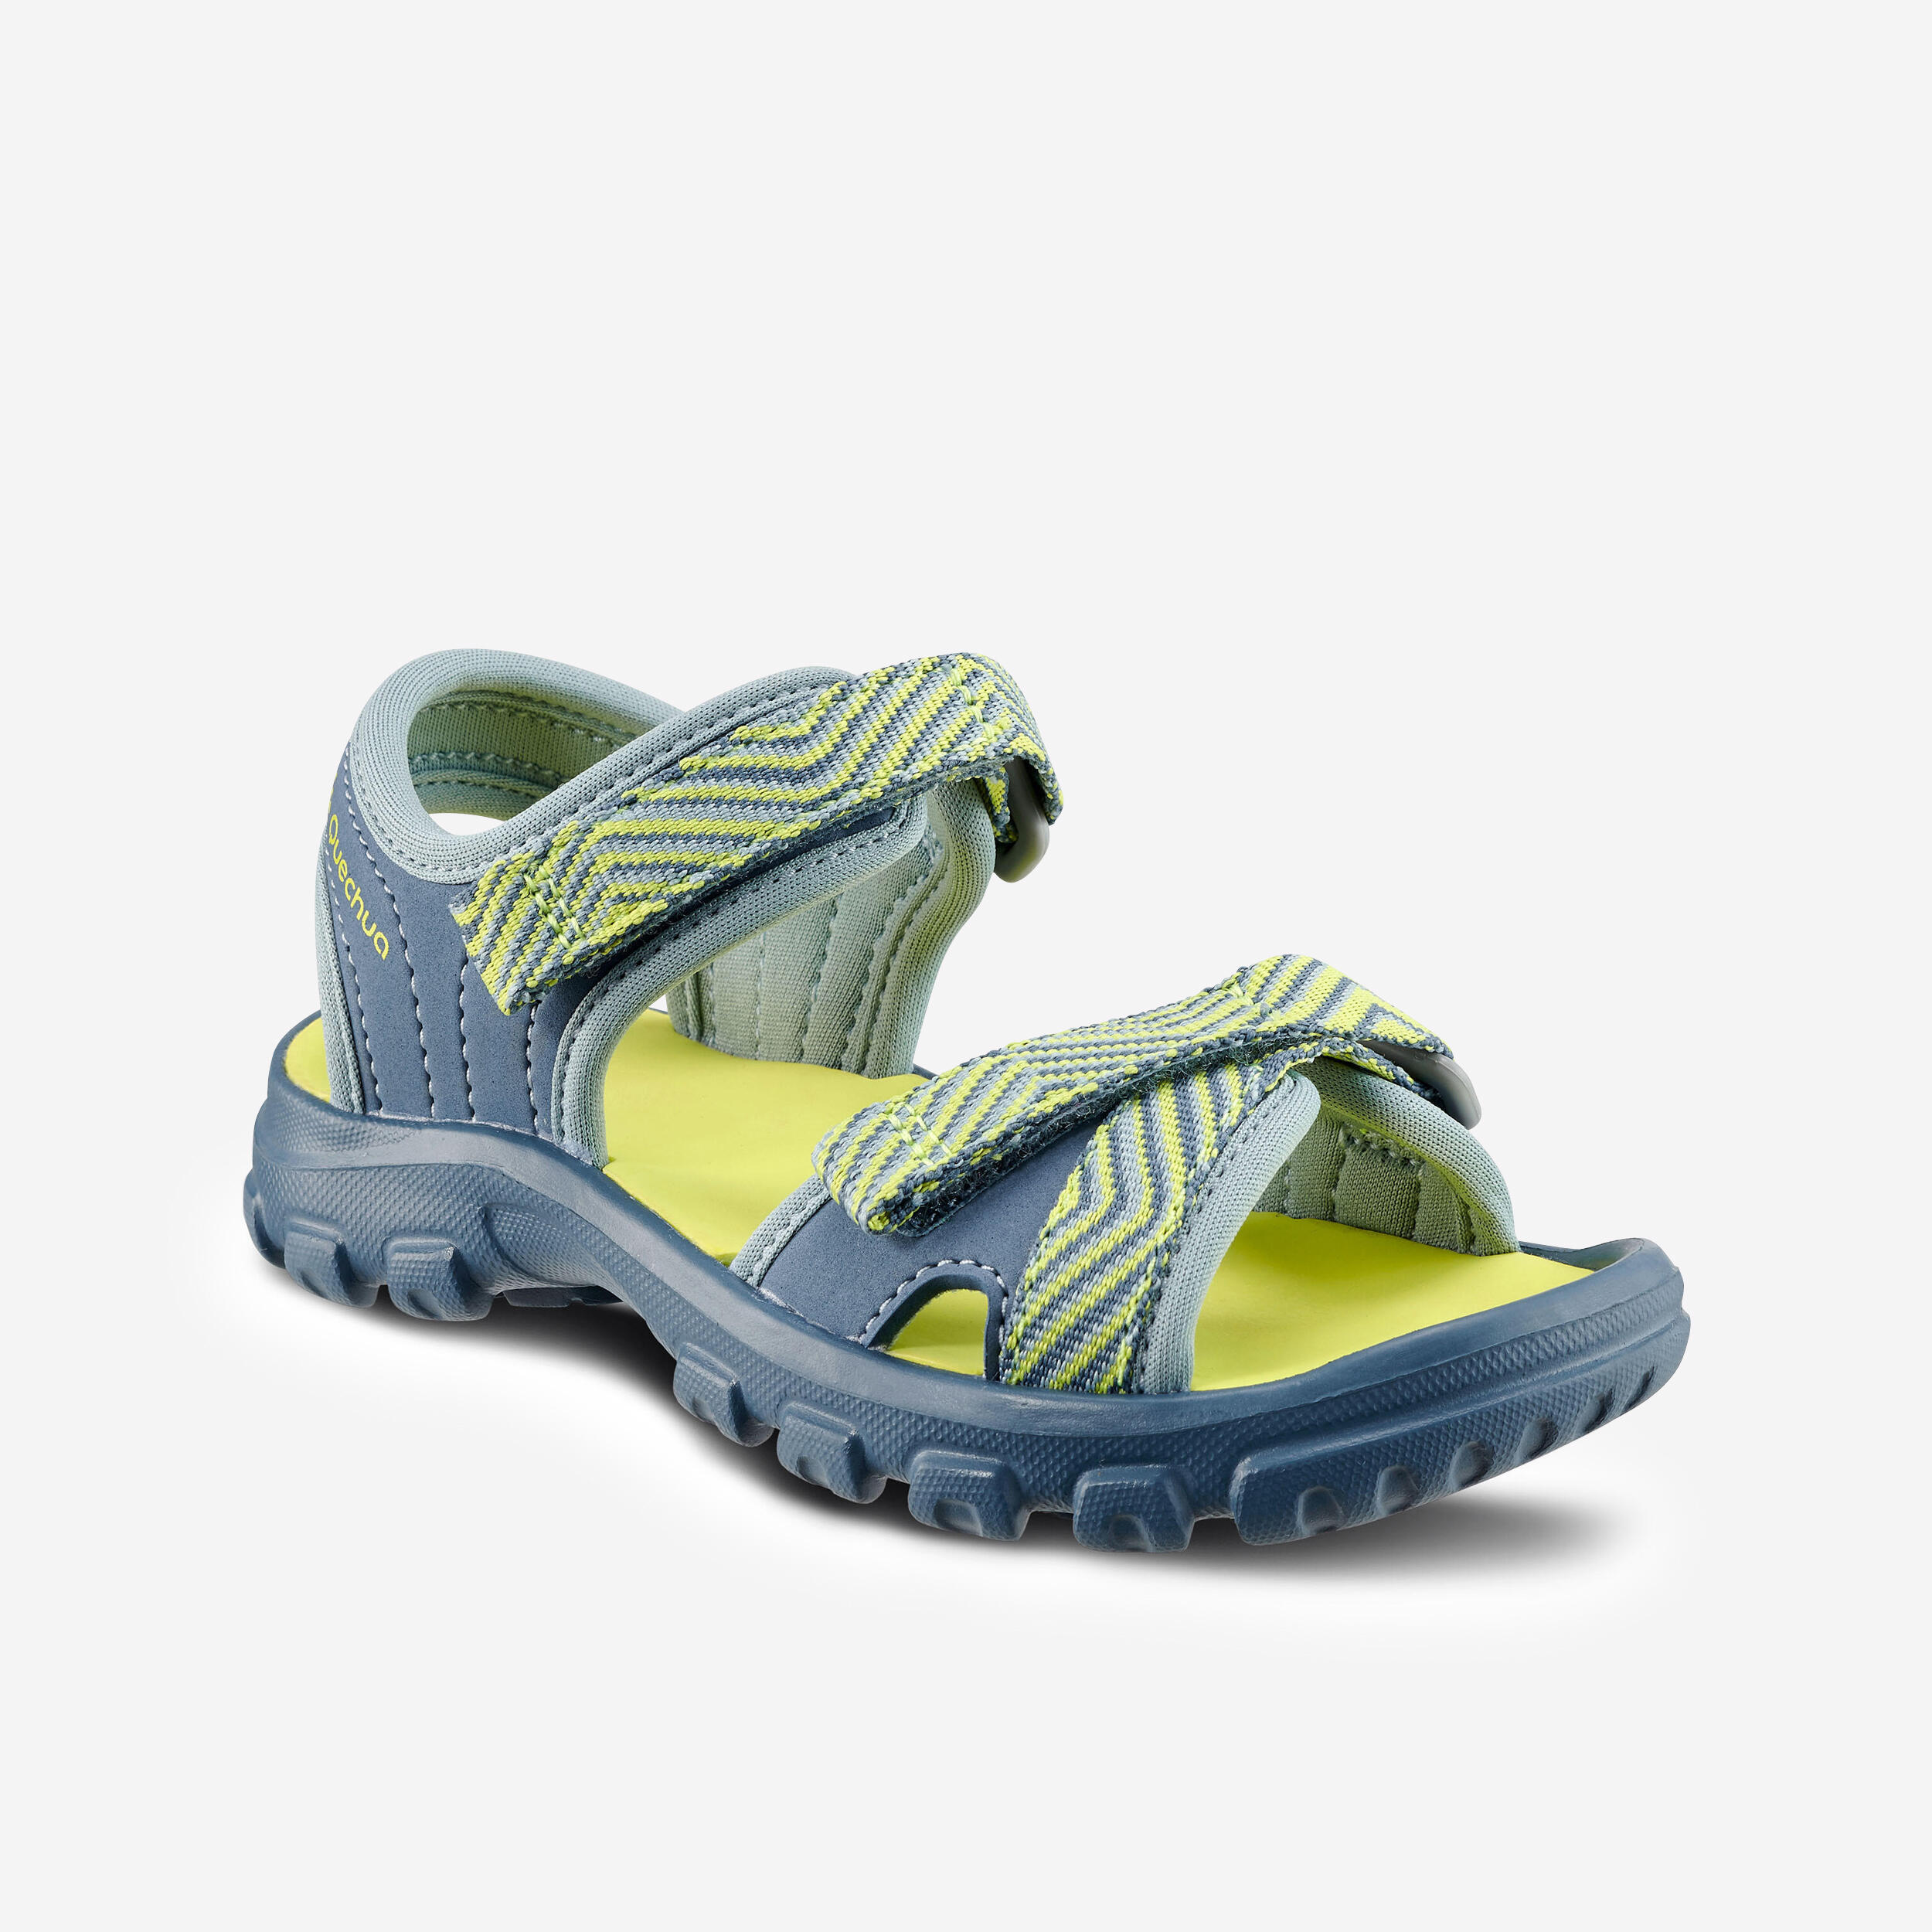 kids hiking sandals kids mh100 blue and yellow size 24 to 31